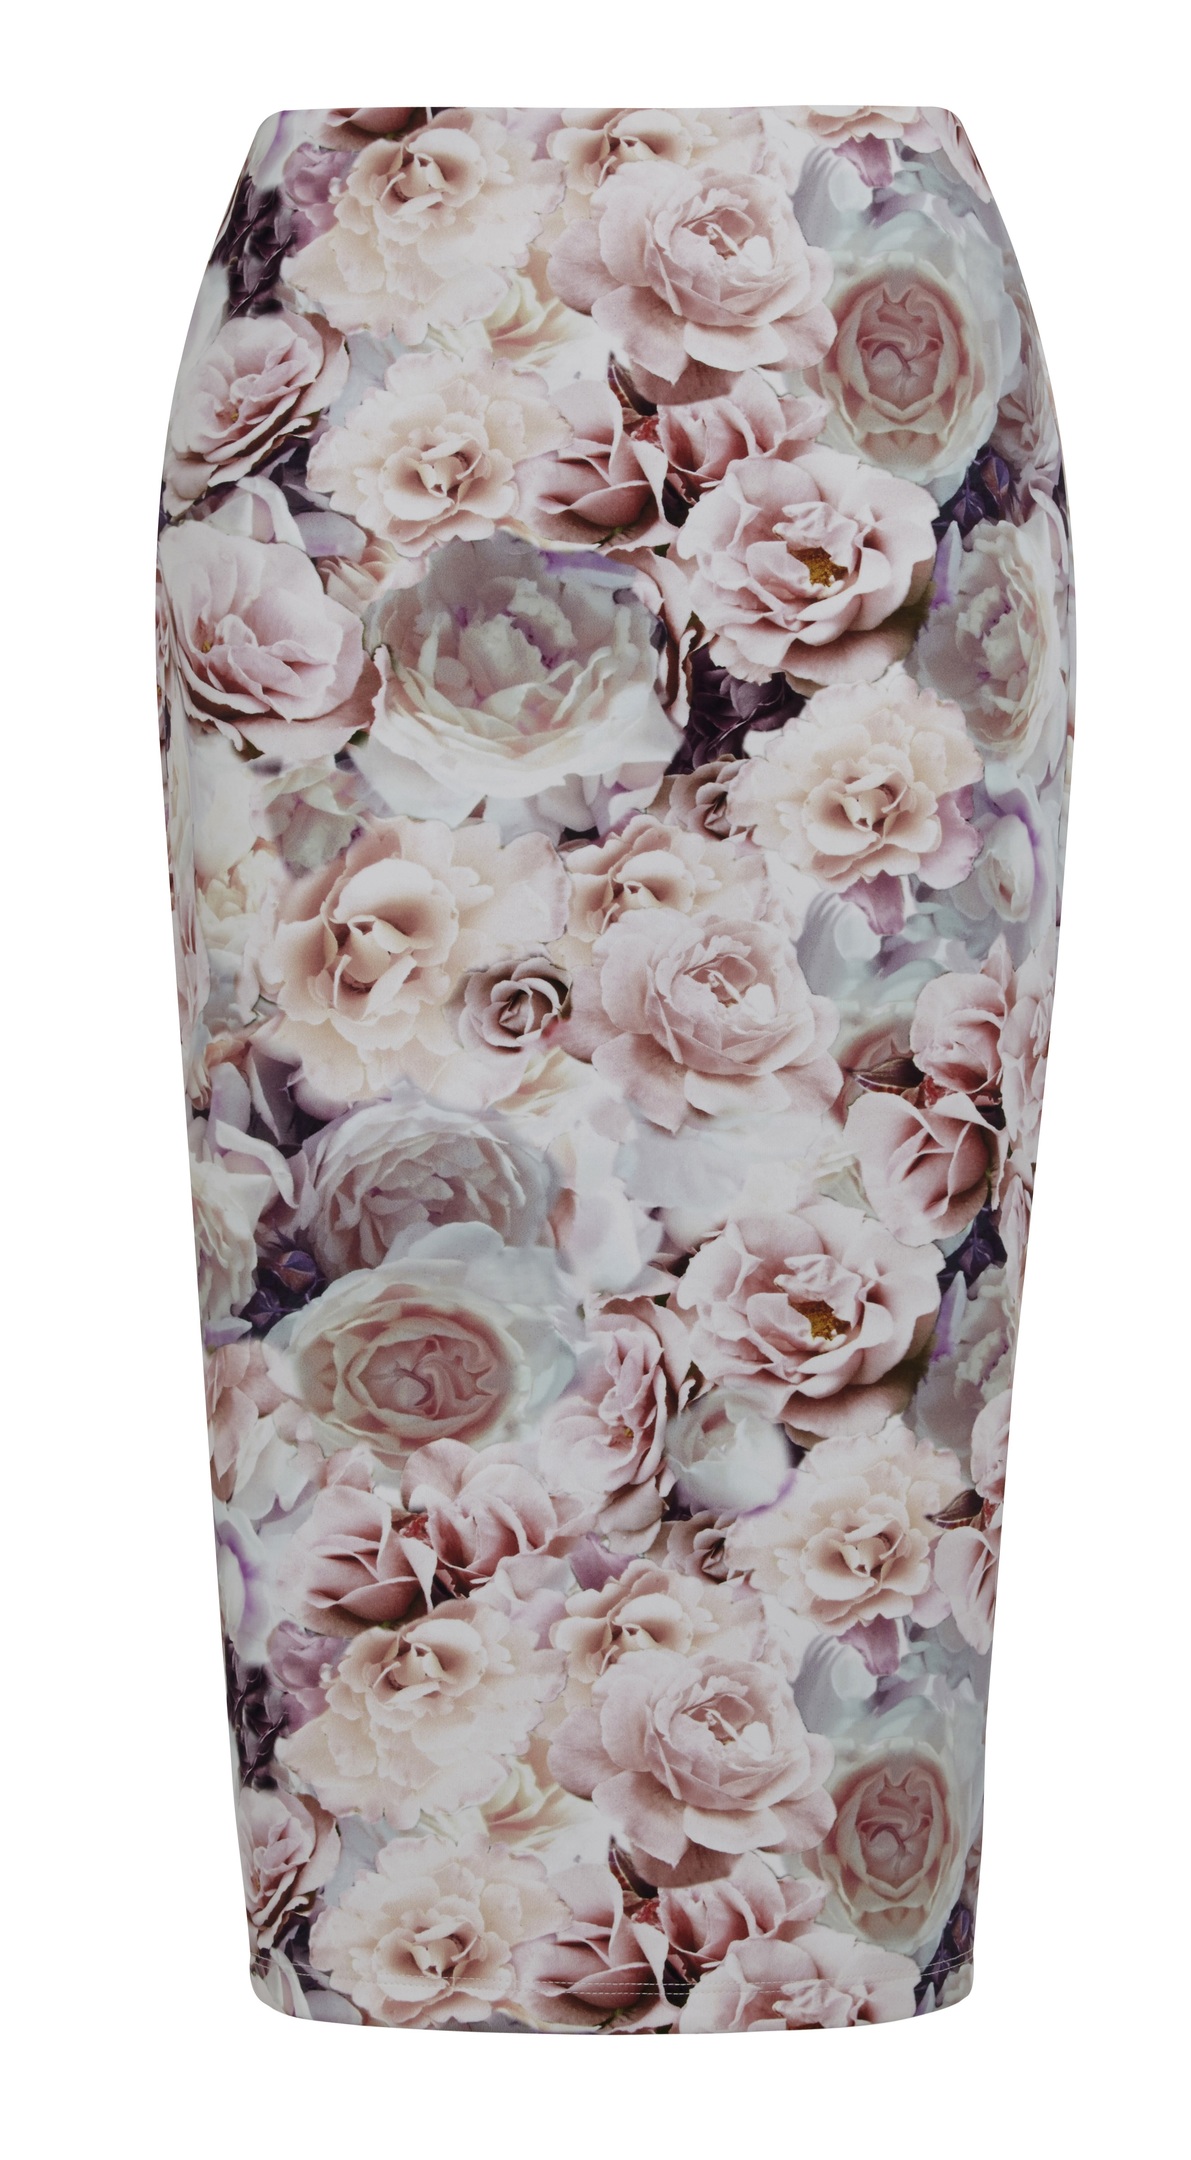 Limited Edition Soft Floral Skirt, £35.00